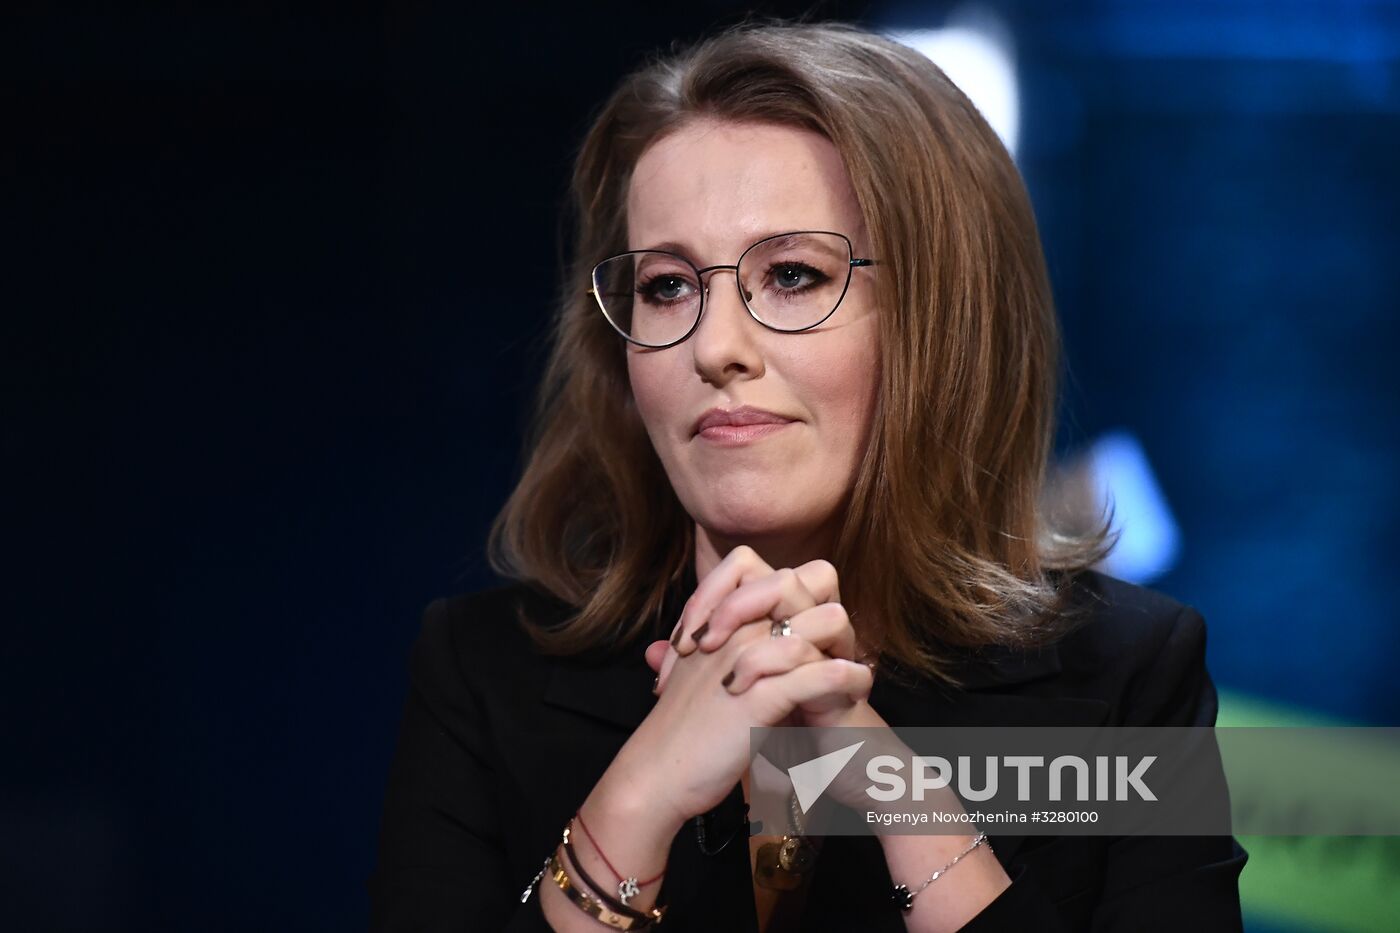 Meeting with Presidential candidate Ksenia Sobchak